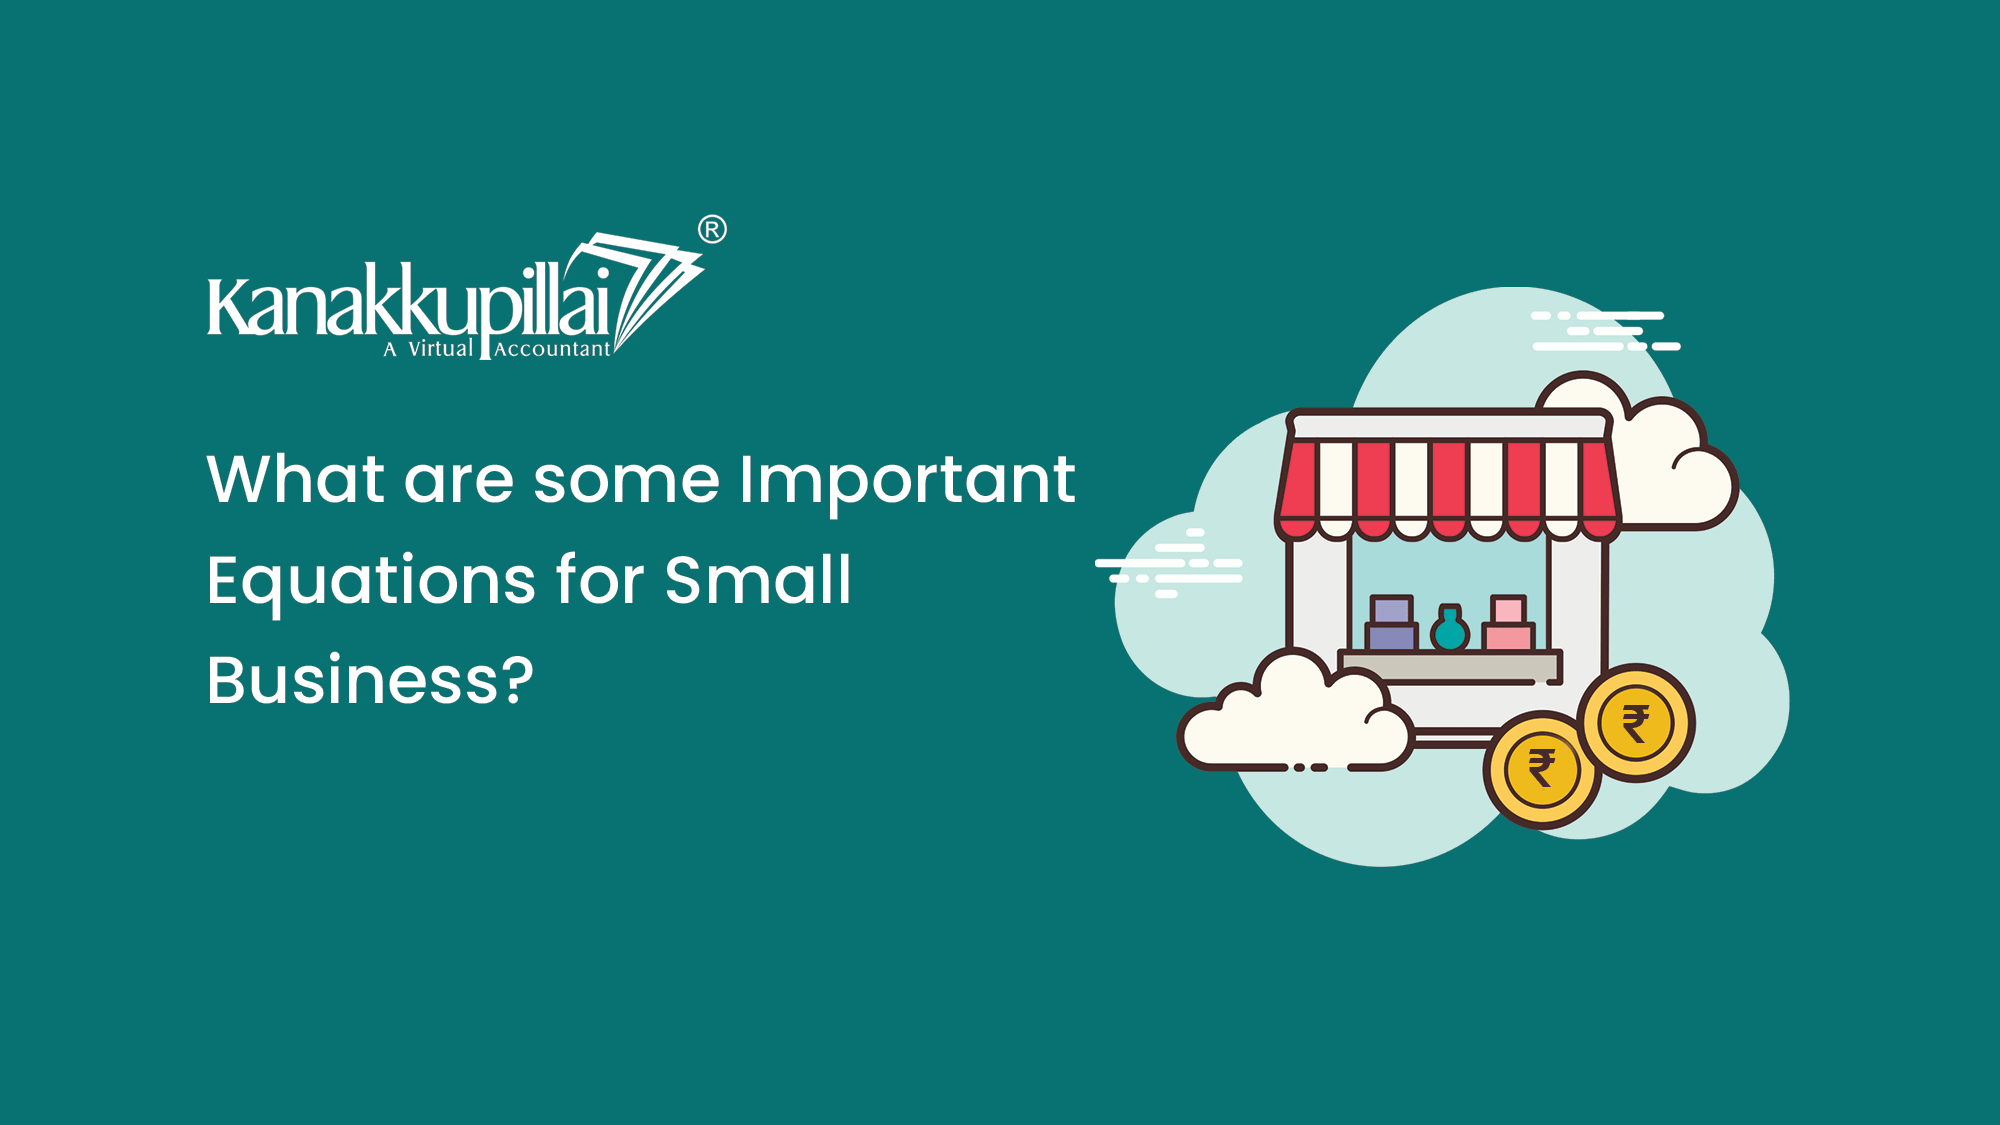 What are some Important Equations for Small Business?